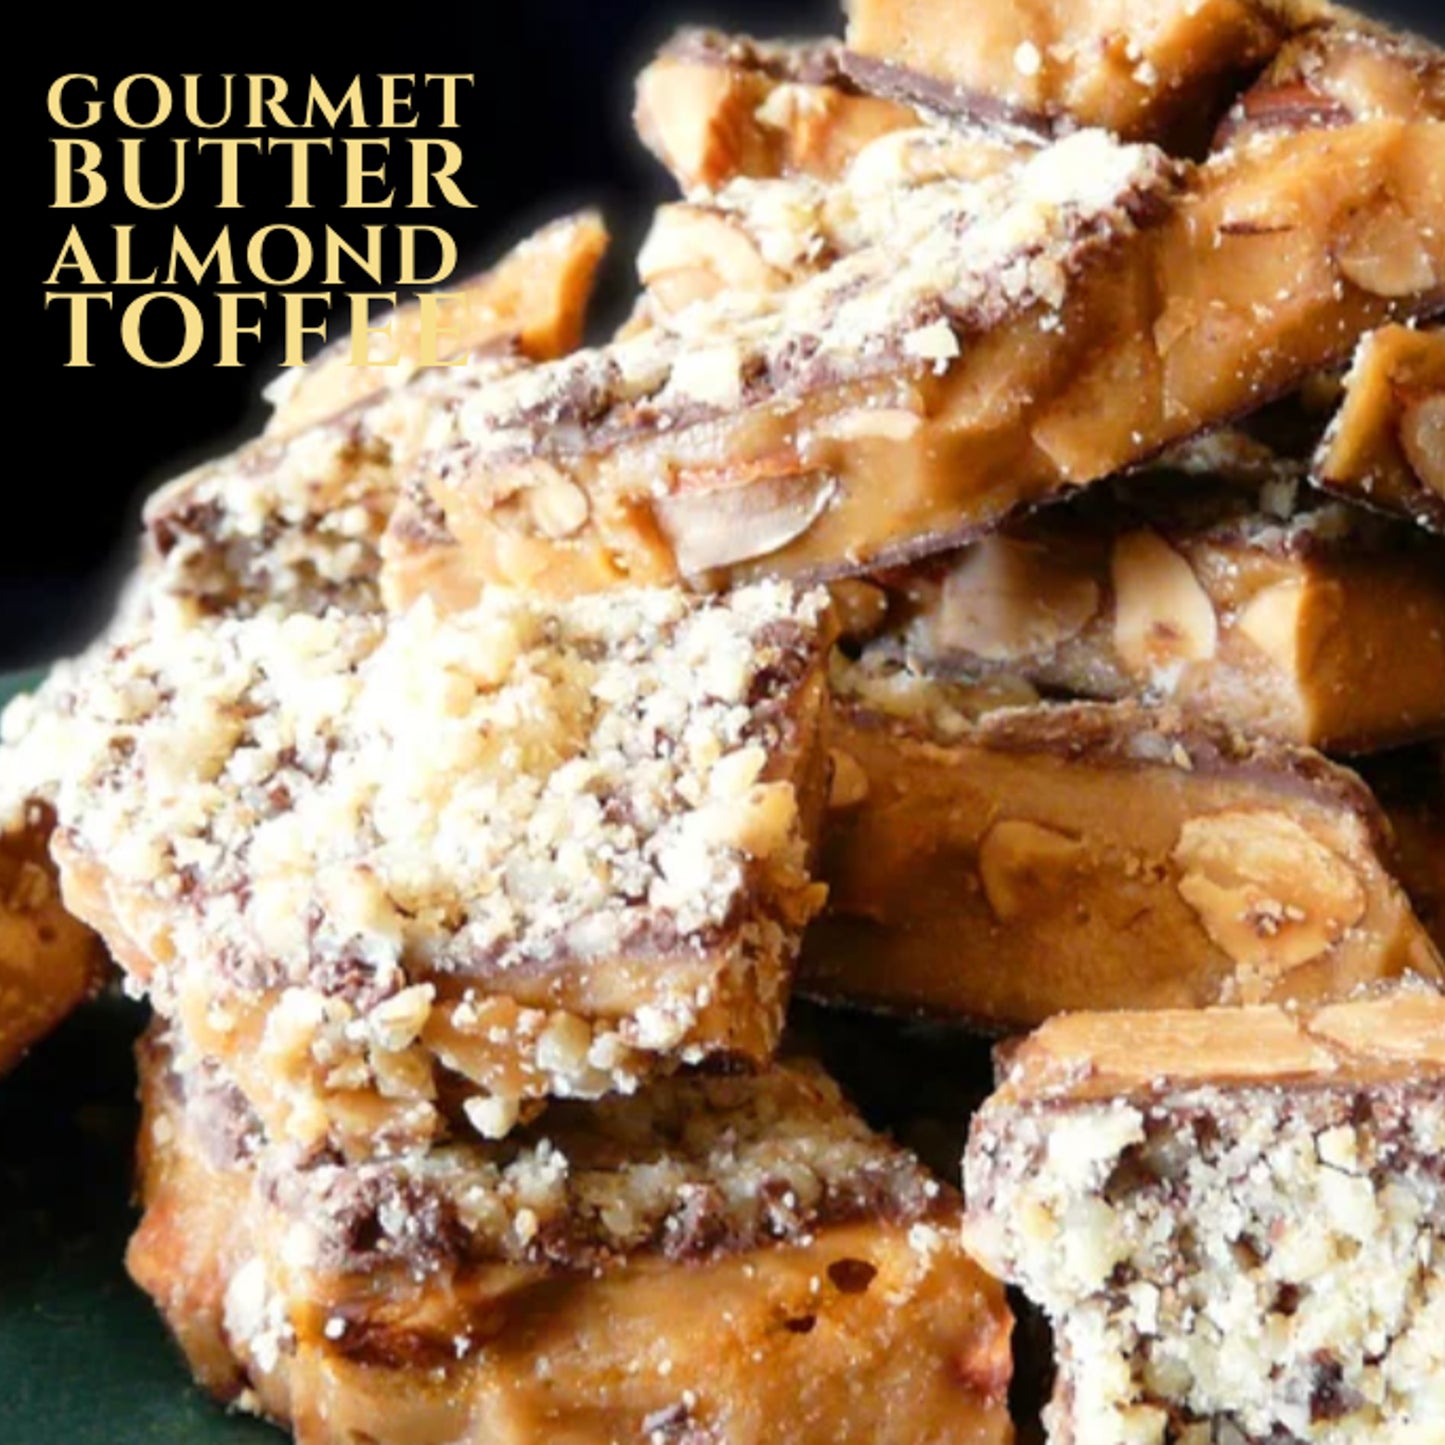 Gourmet Almond Butter Toffee by Christmas Valley Candy Factory